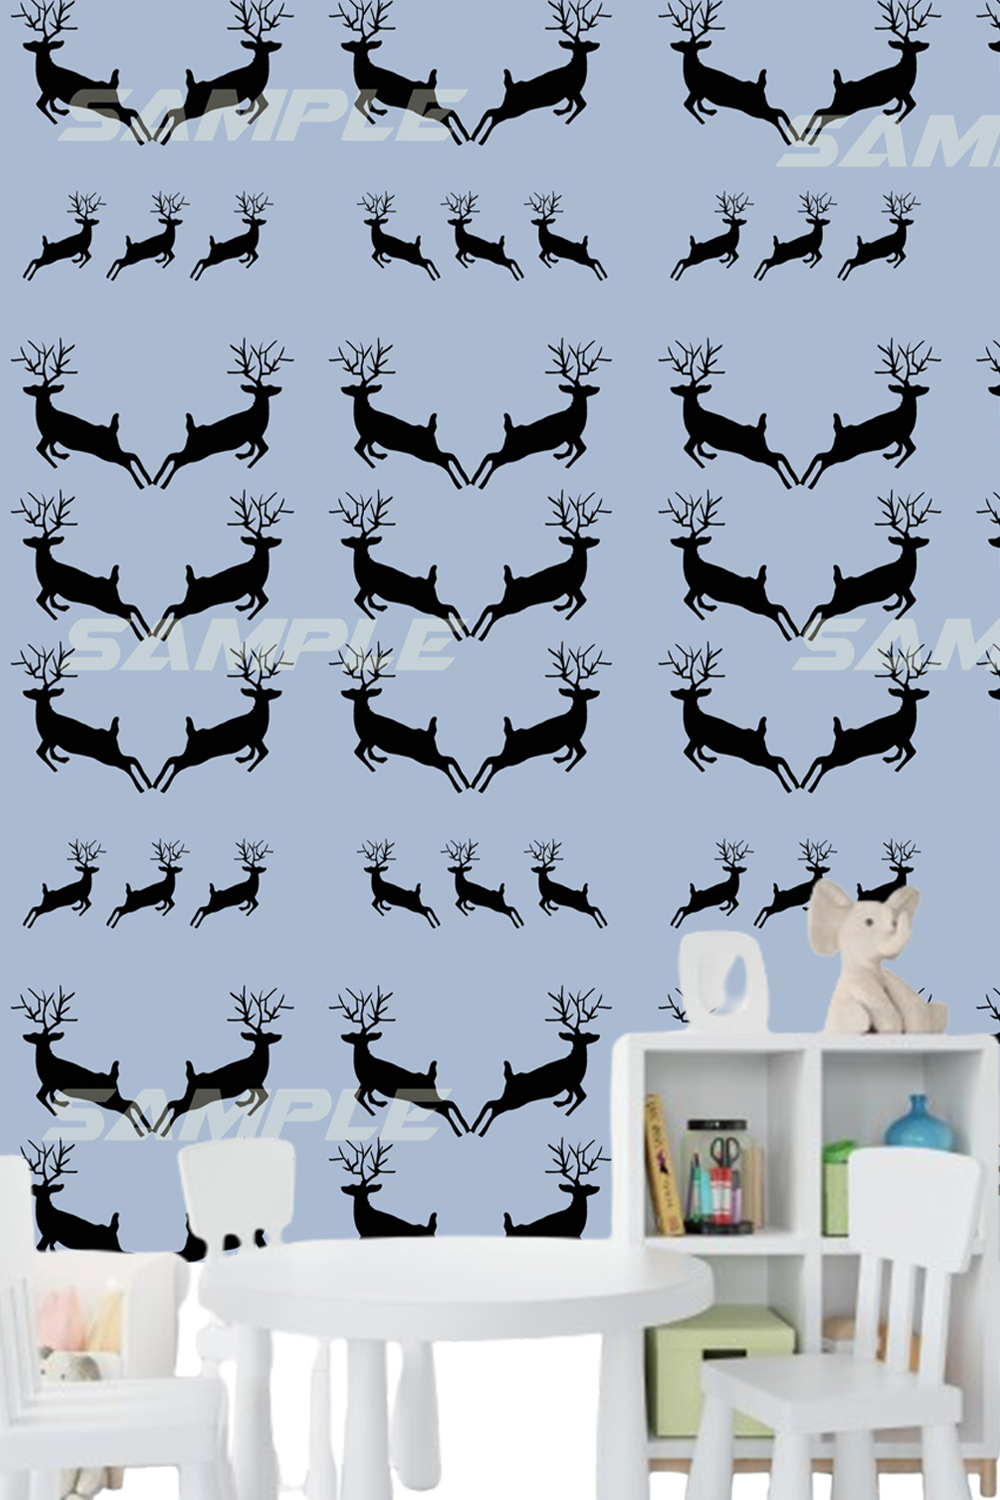 WhimsyWalls: Transform Your Kid's World with Enchanting Wallpaper Designs! pinterest preview image.